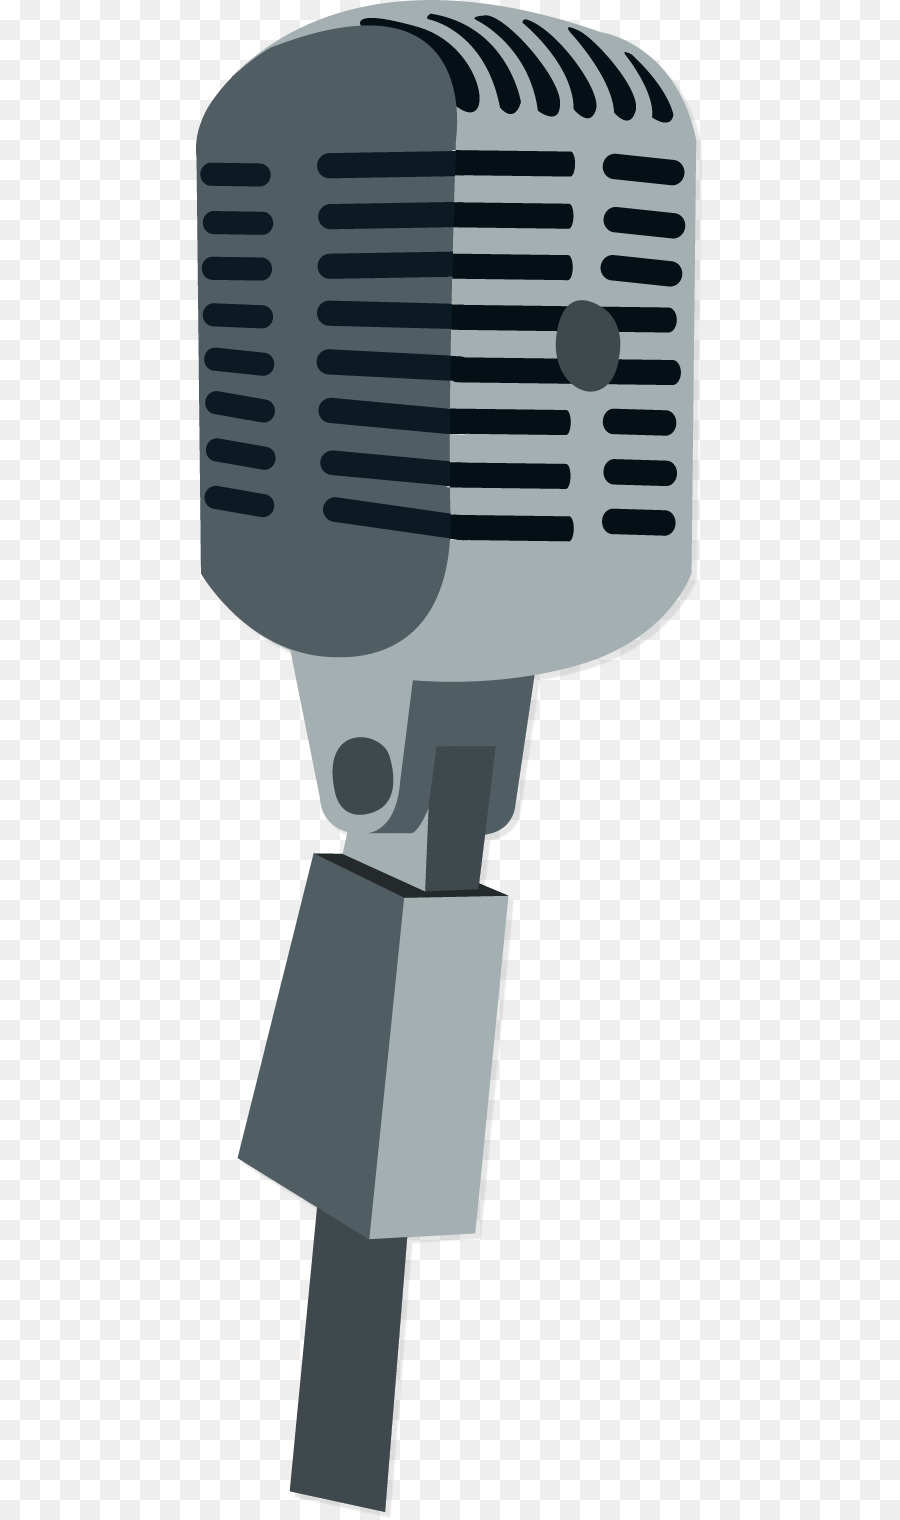 Microphone Cartoon Icon - Old microphone png download - 508*1520 - Free Transparent  png Download.